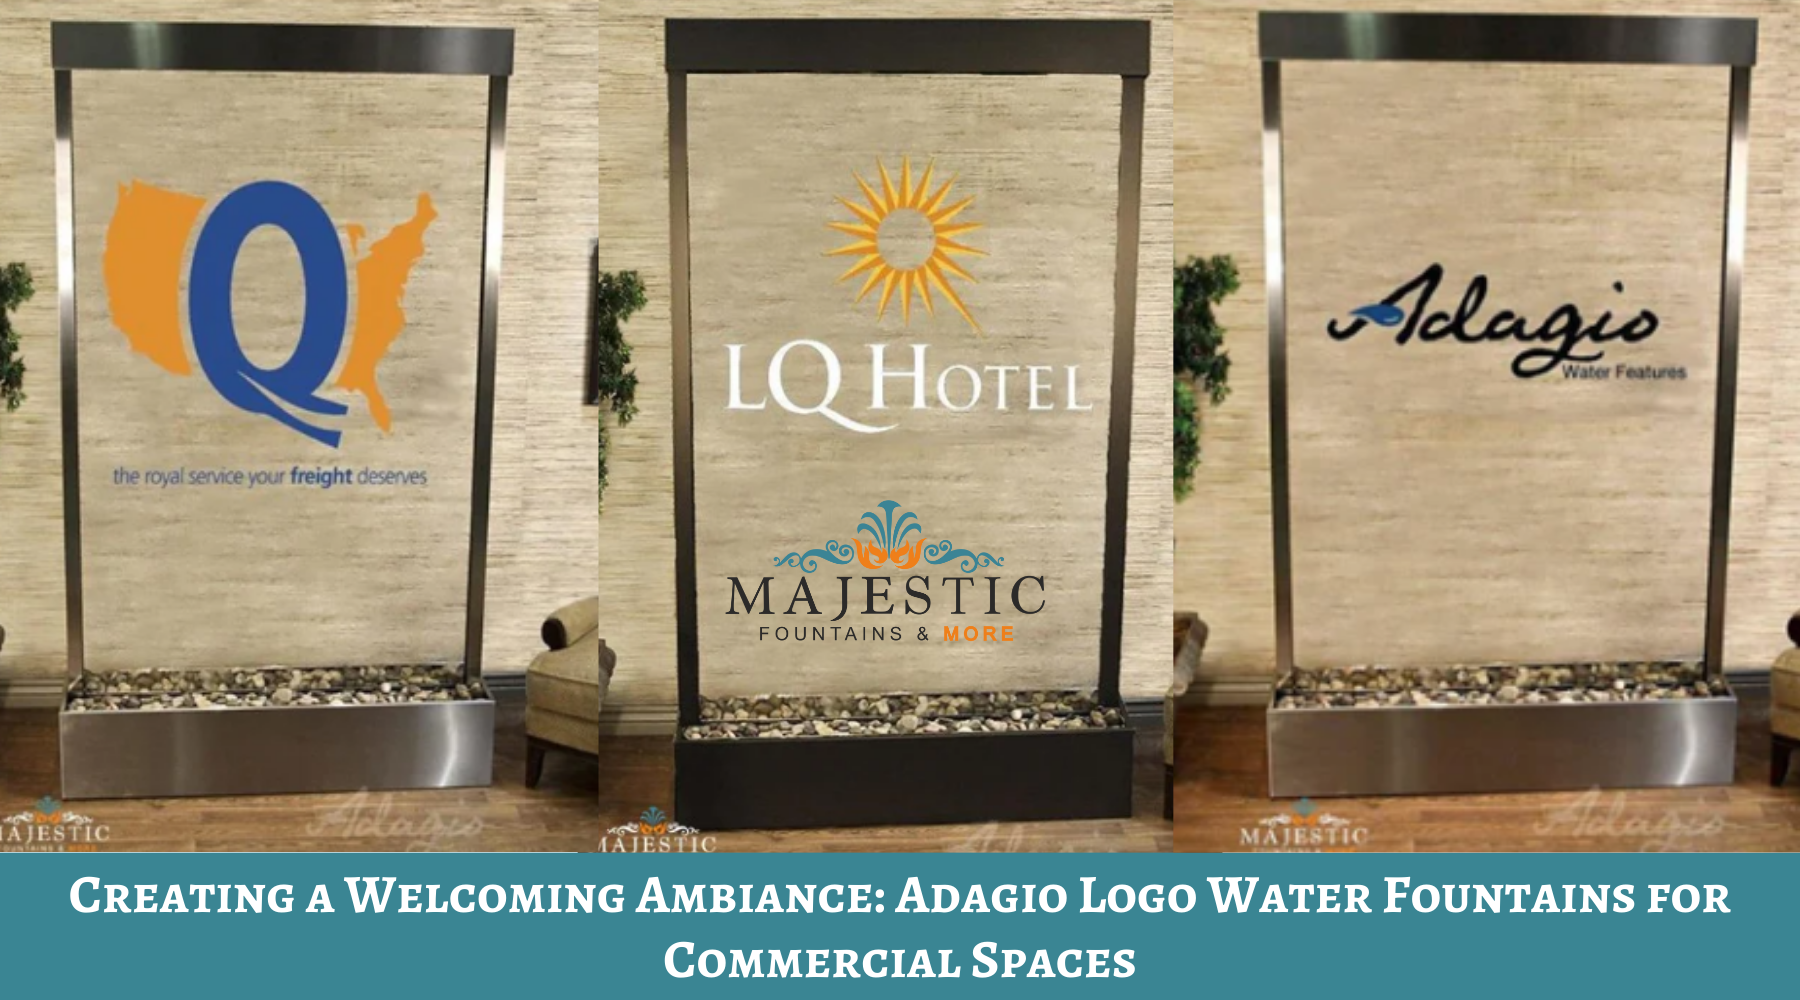 Creating a Welcoming Ambiance: Adagio Logo Water Fountains for Commercial Spaces